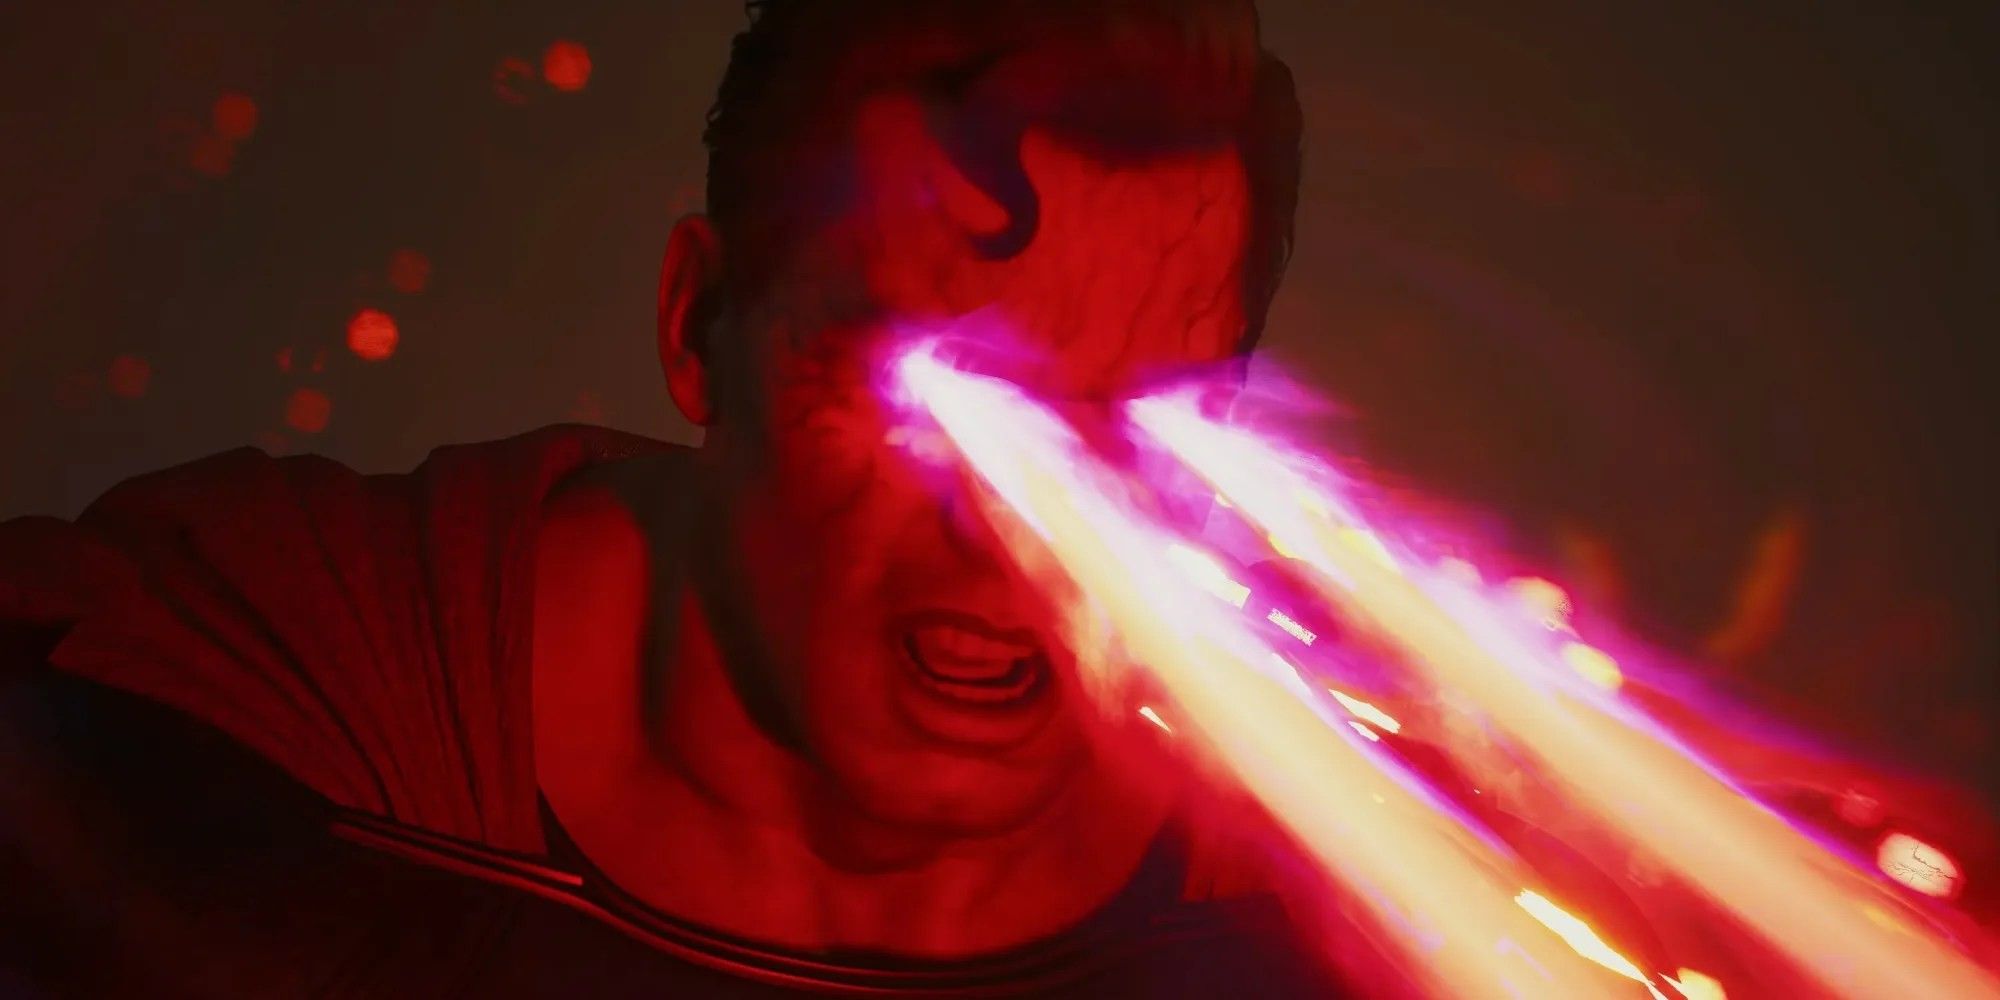 Superman using heat vision in Suicide Squad: Kill The Justice League